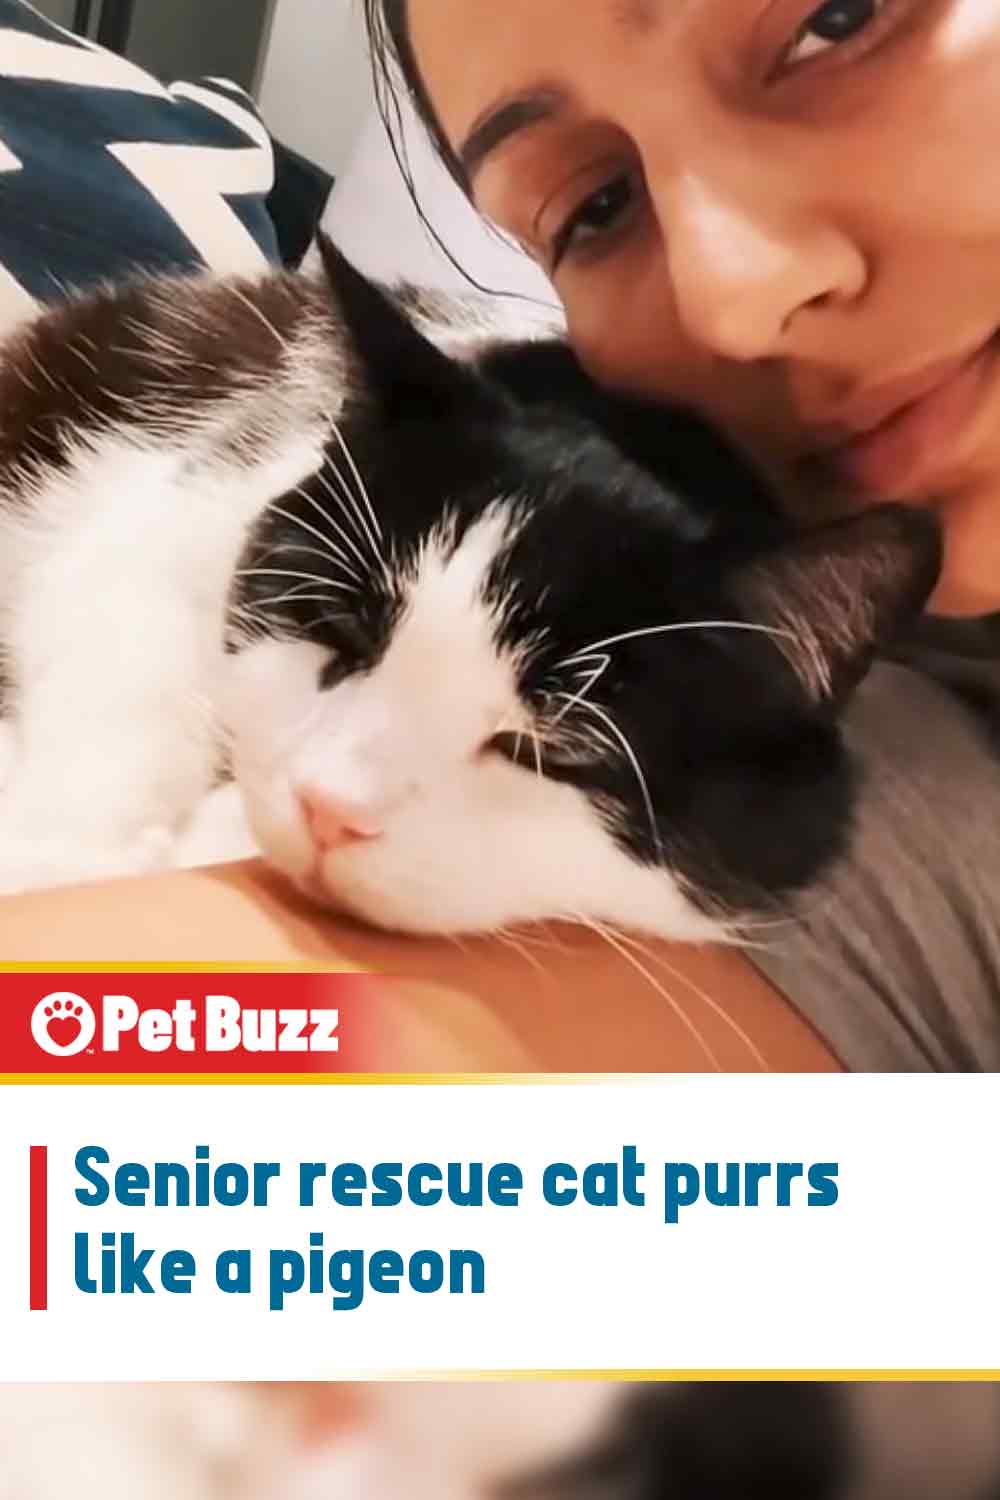 Senior rescue cat purrs like a pigeon